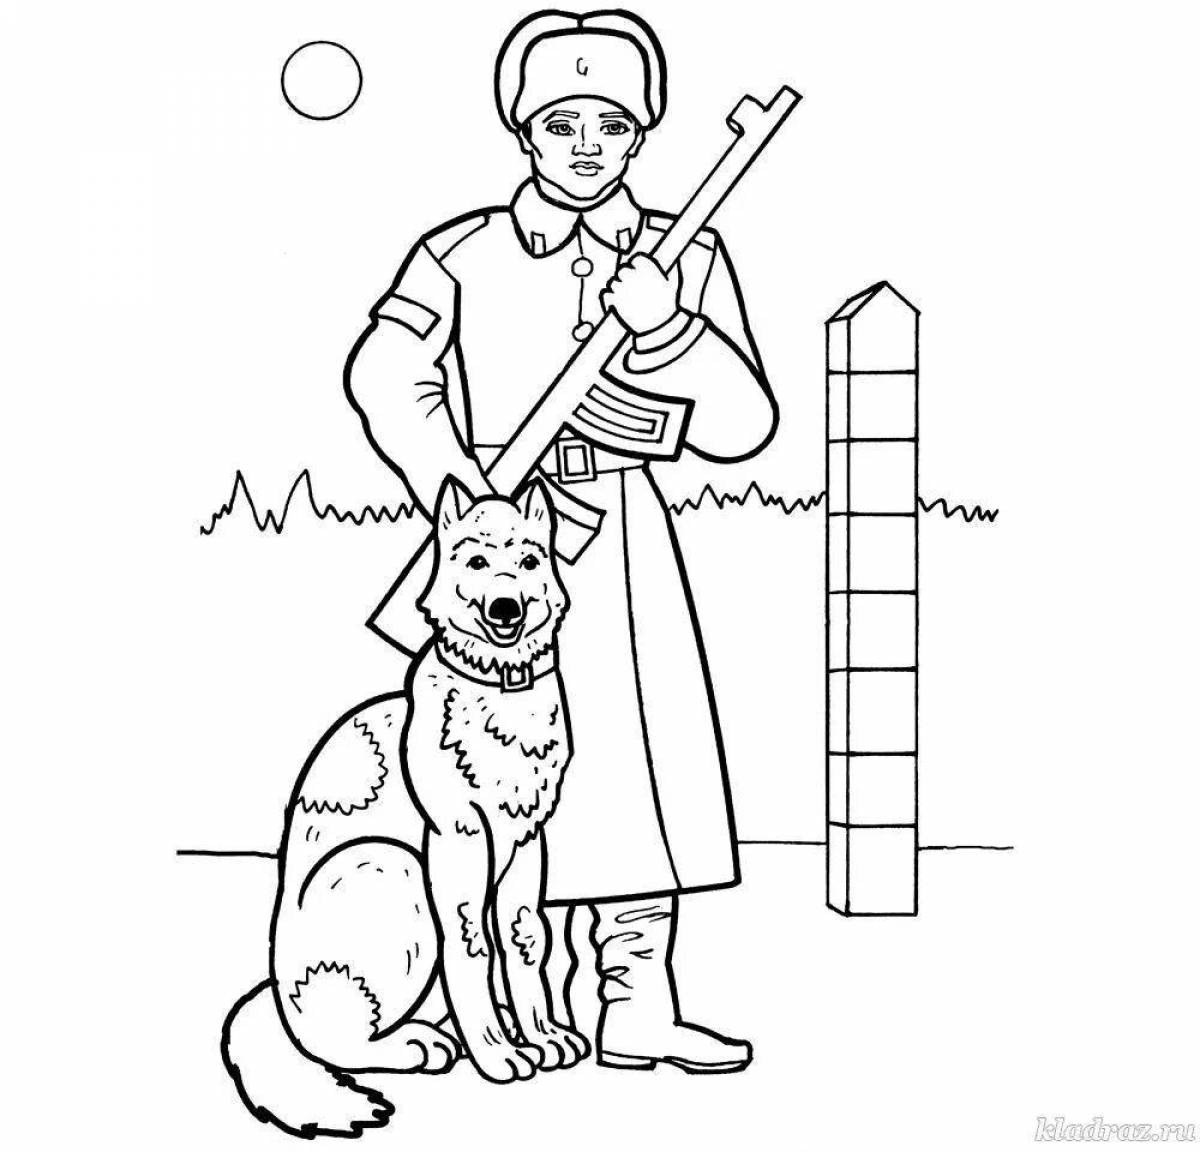 Inspirational military occupation coloring book